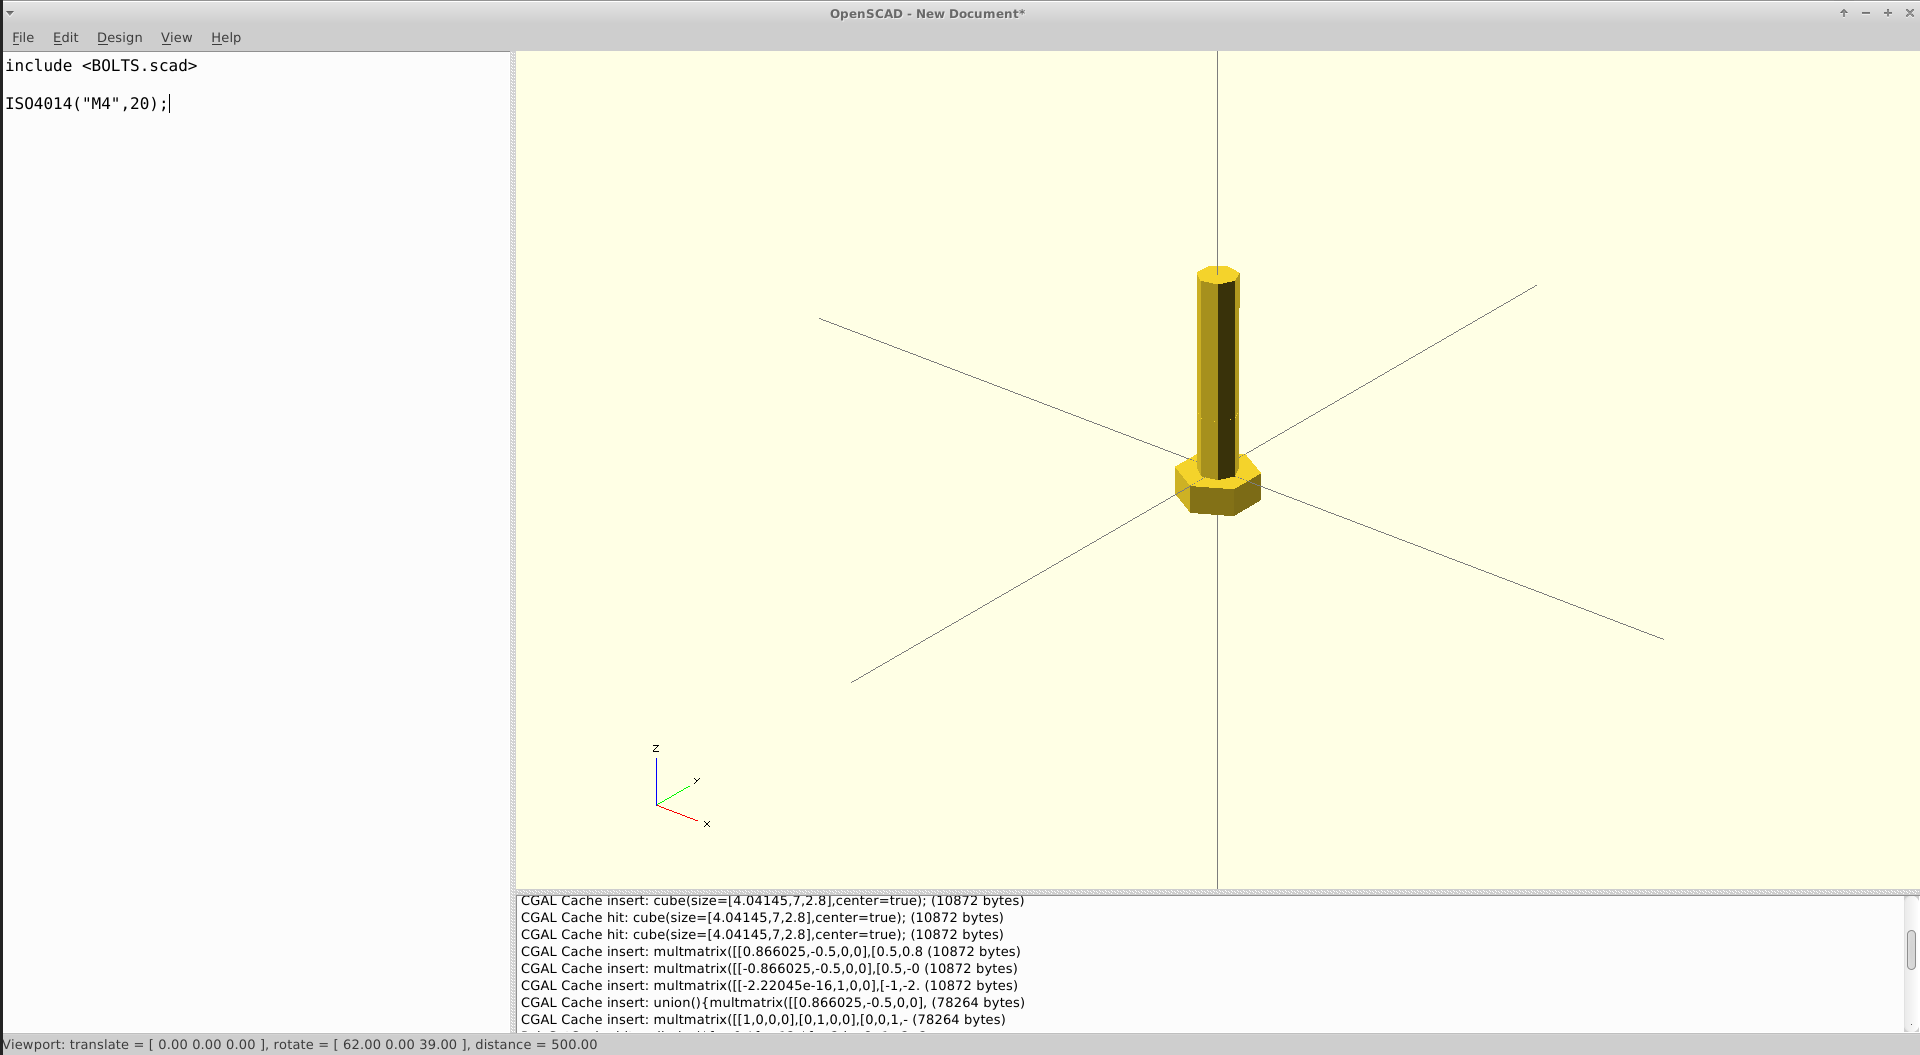 OpenSCAD and bolt